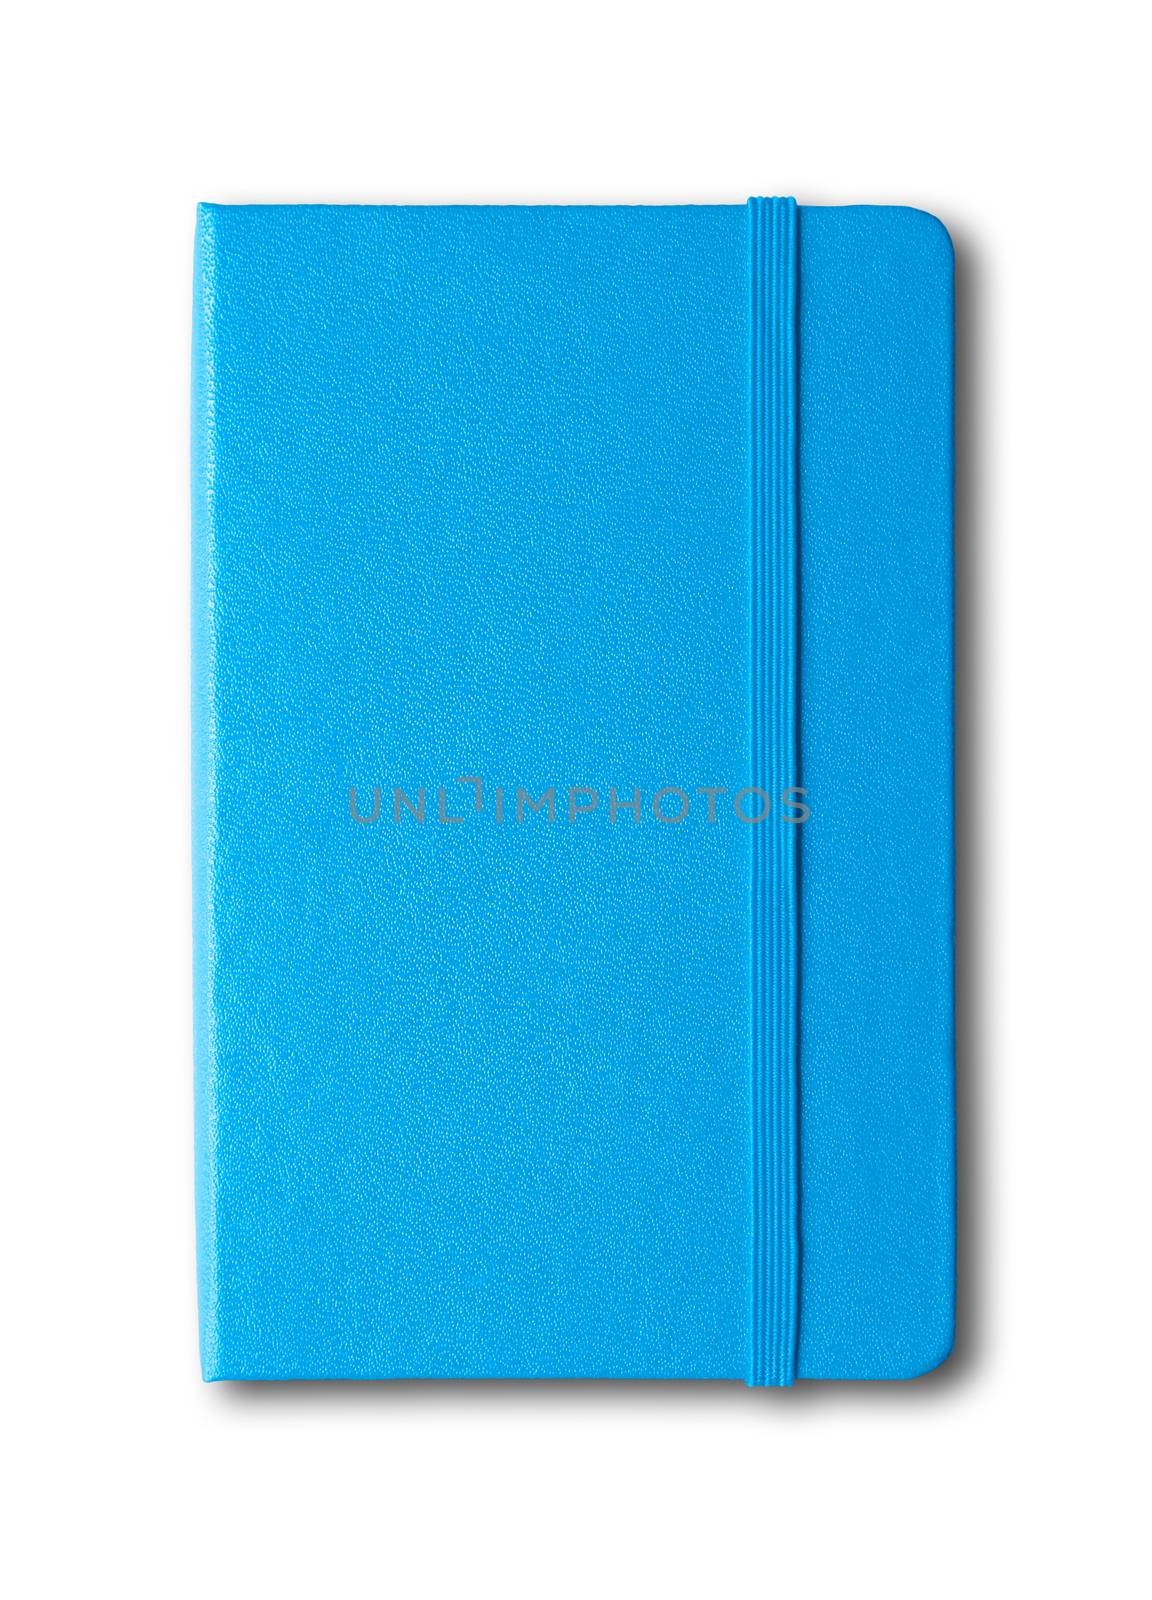 blue closed notebook mockup isolated on white